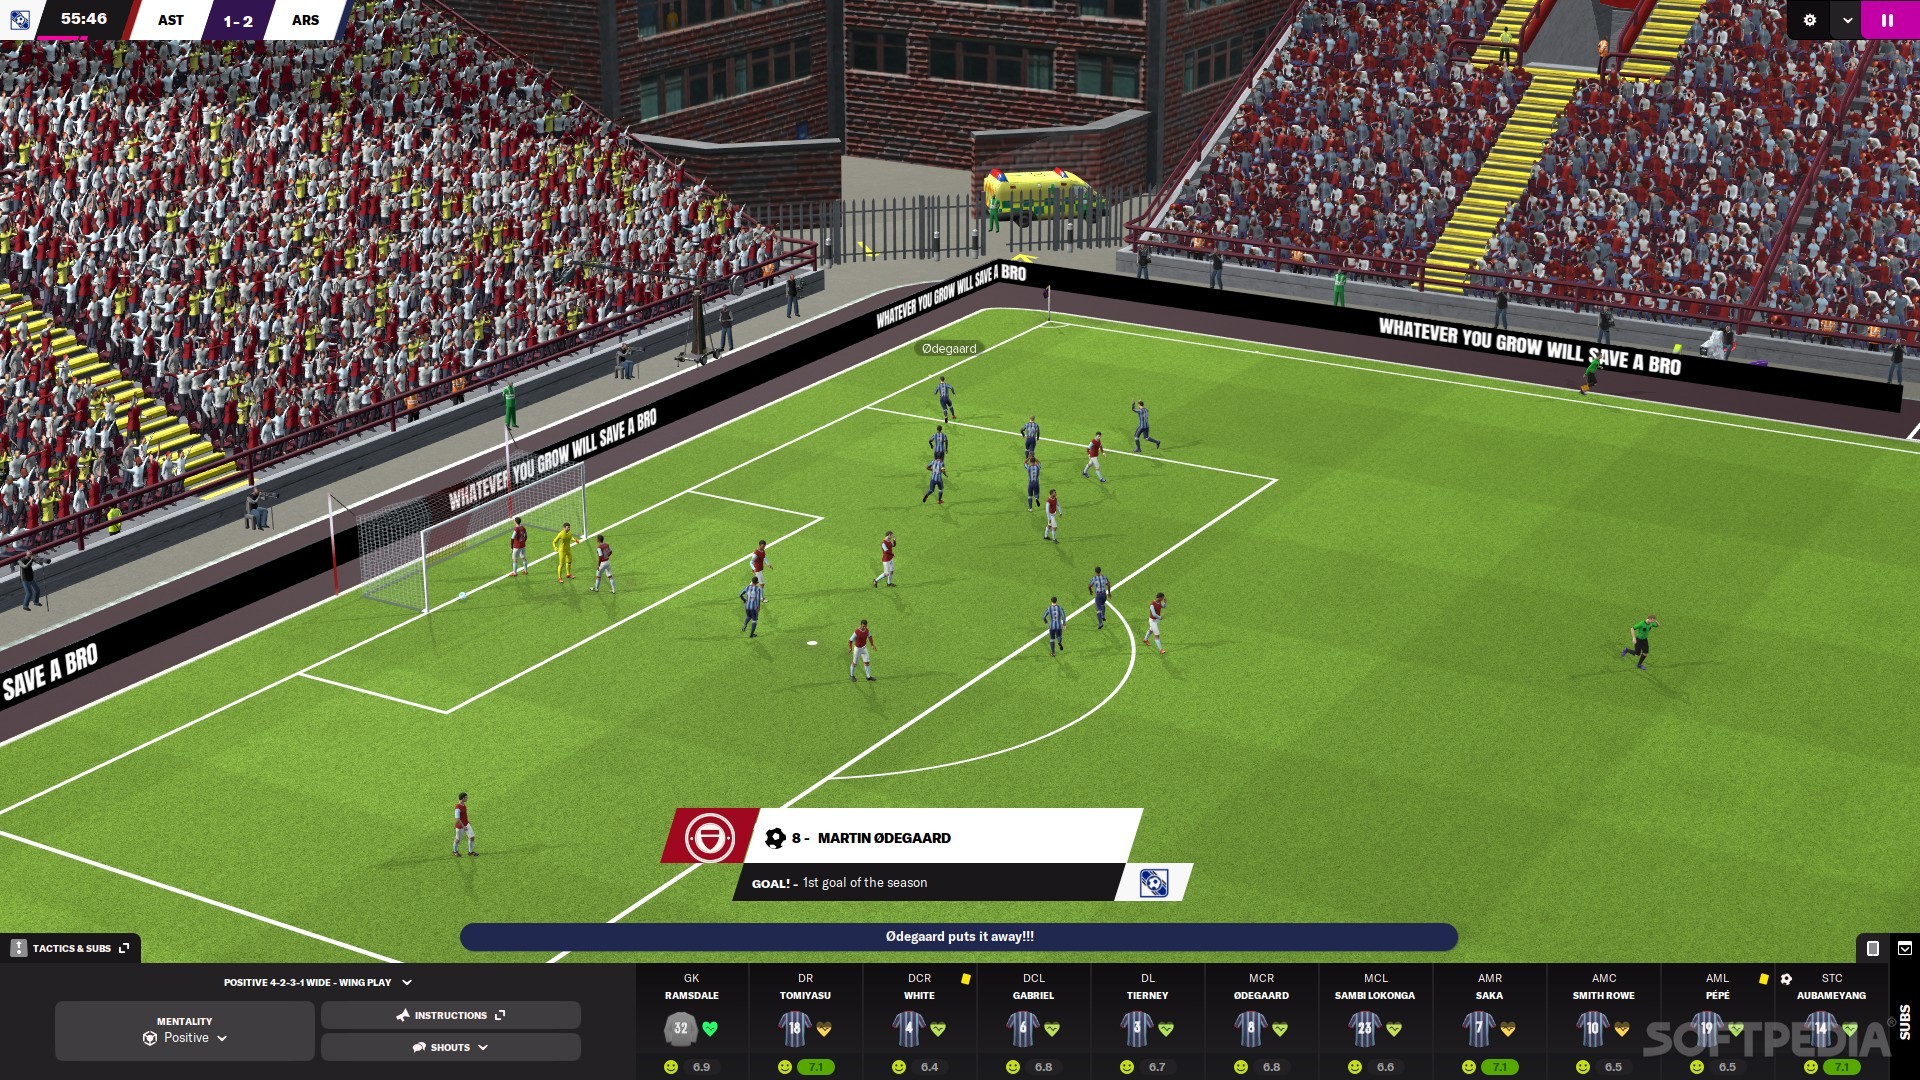 Football Manager 2022 (for PC) Review